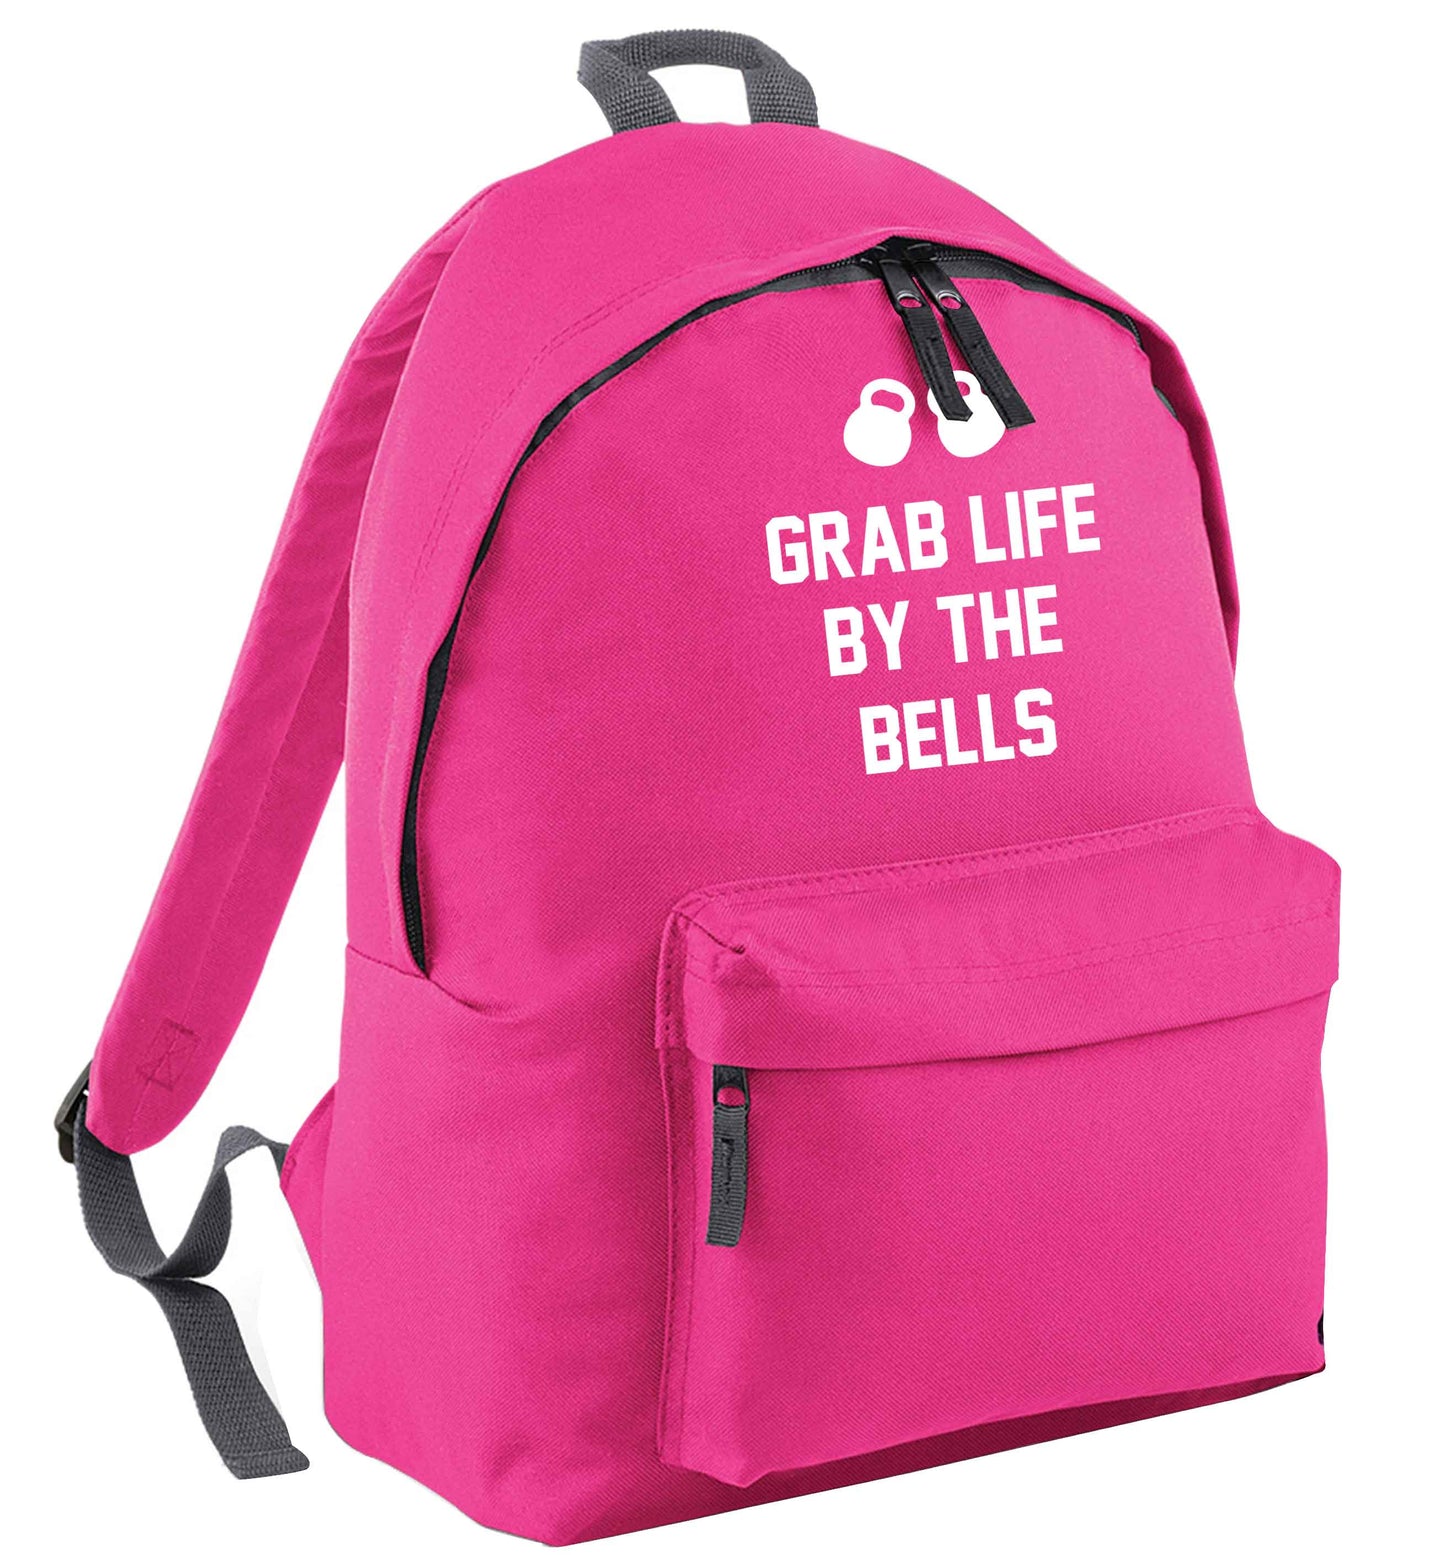 Grab life by the bells pink adults backpack